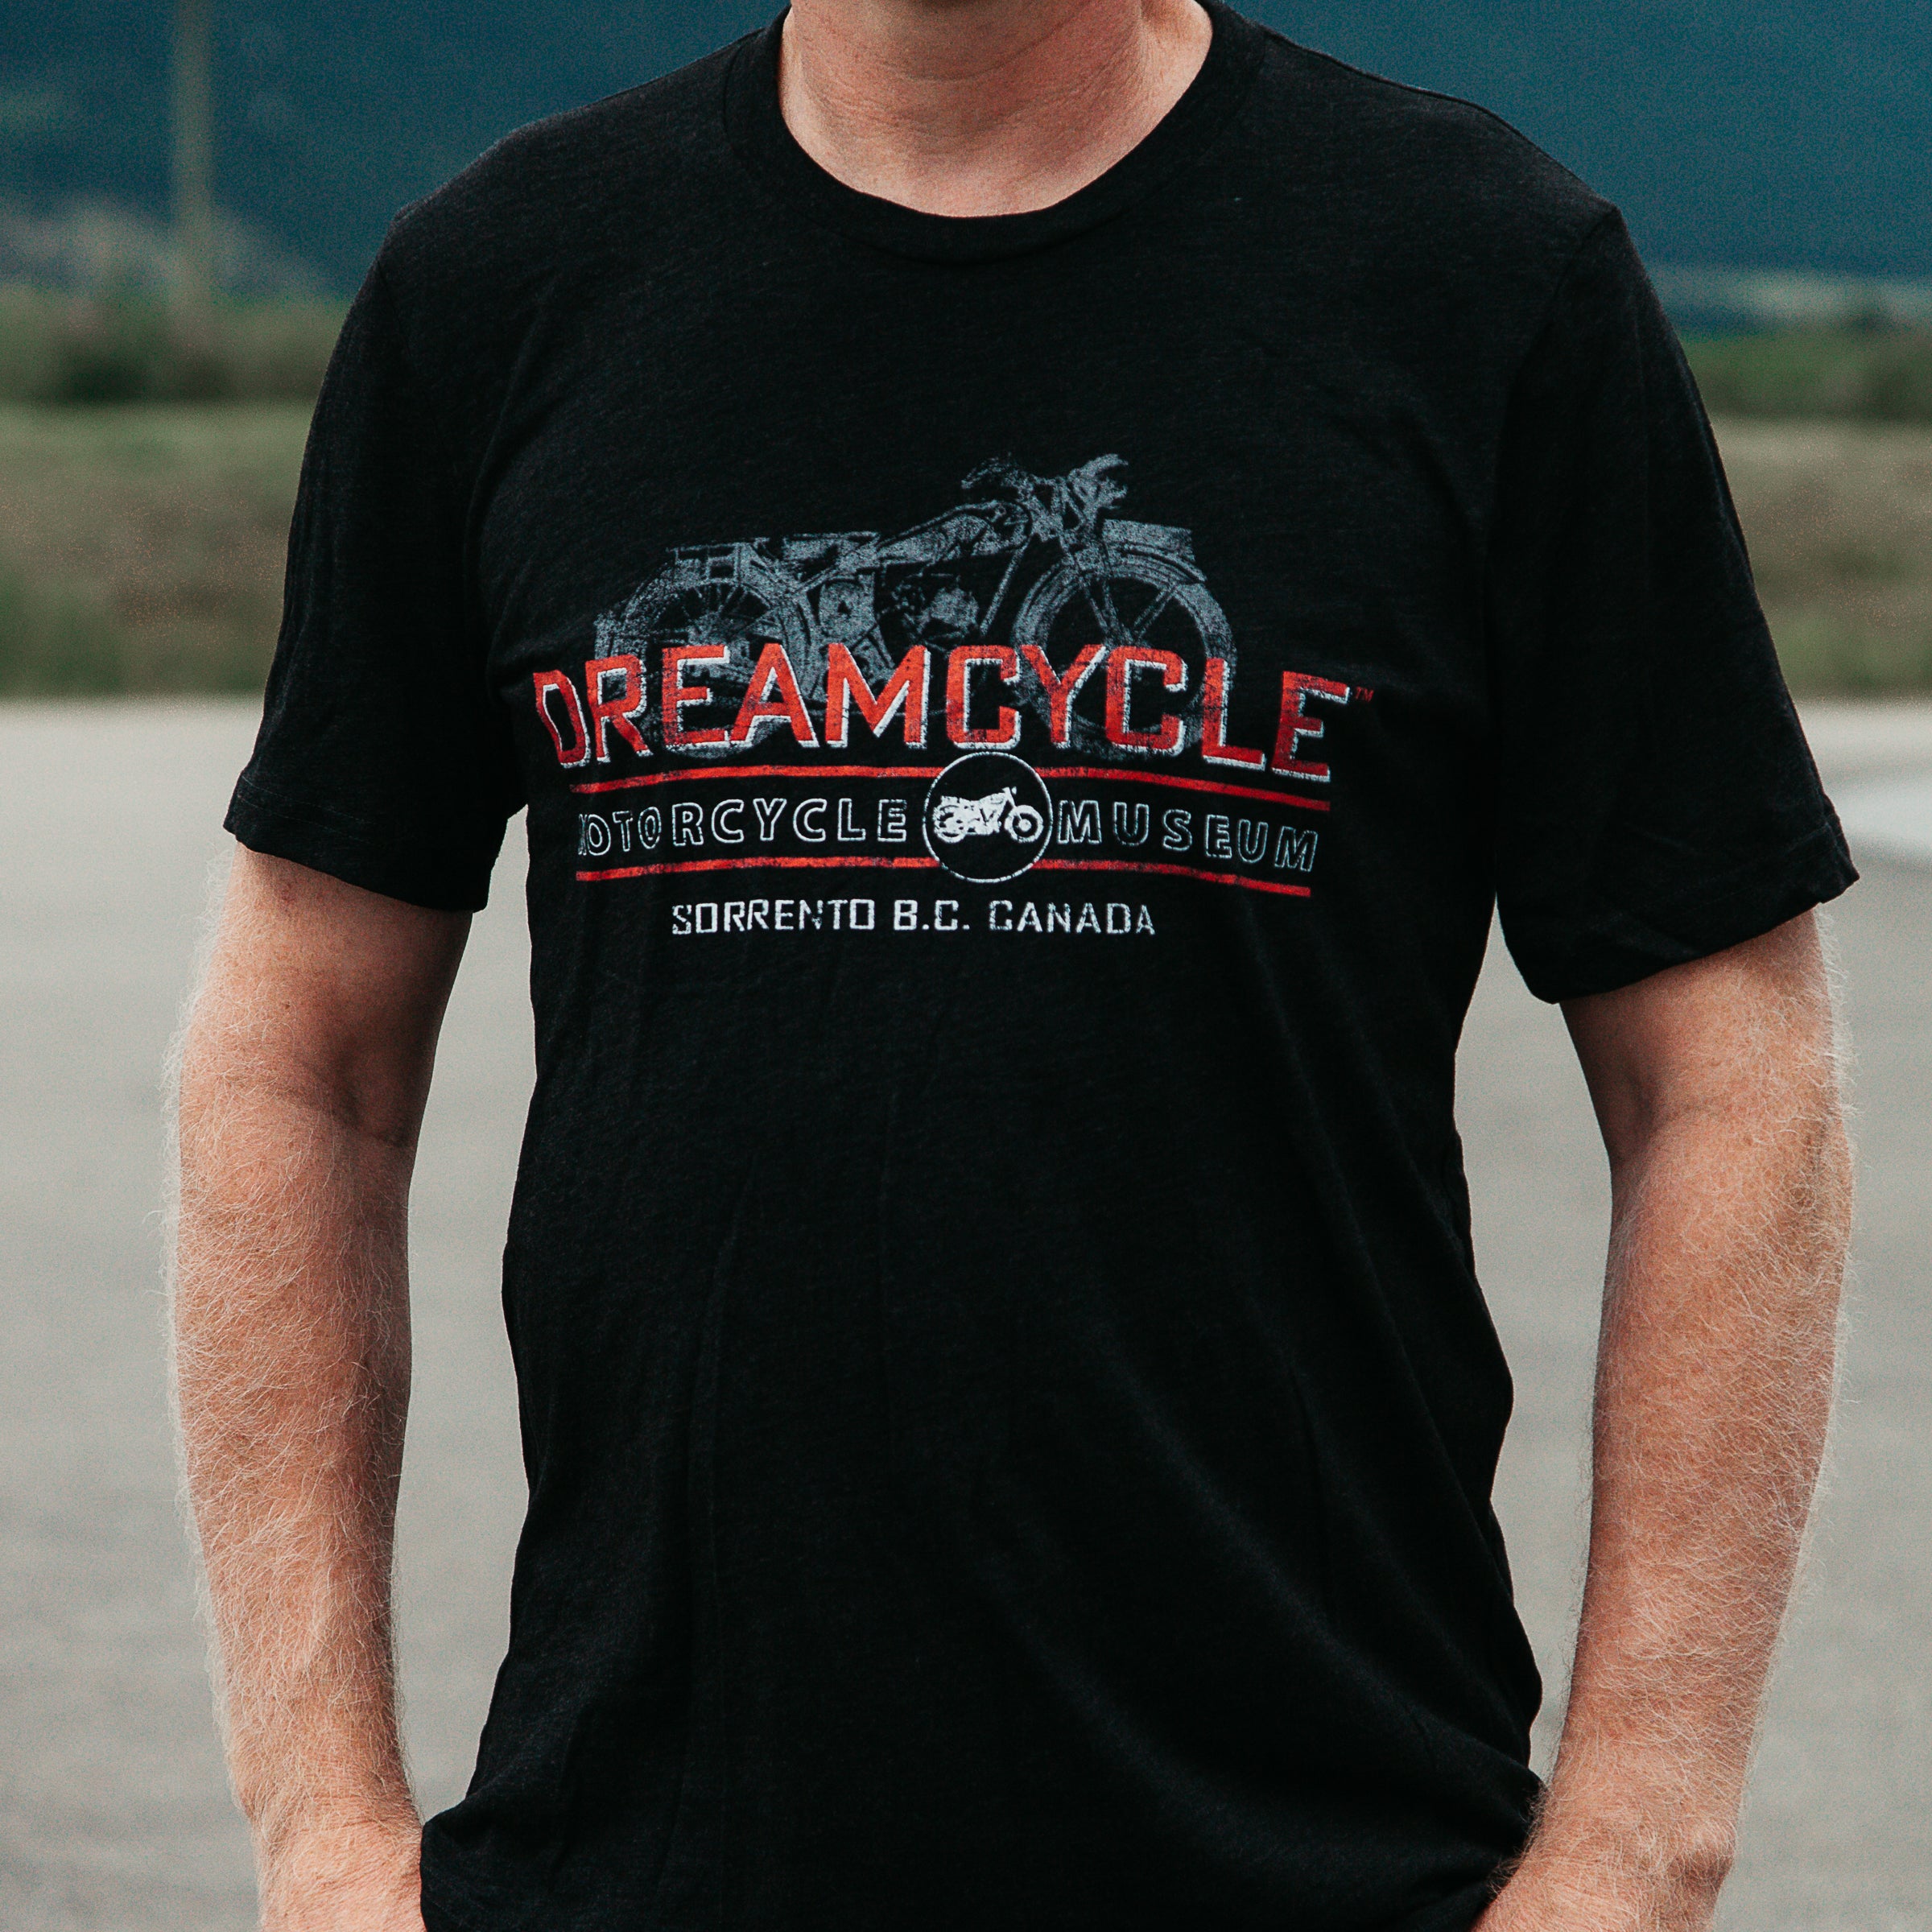 Dreamcycle Motorcycle Museum | Closeup man modeling dreamcycle tshirt with motorcycle.